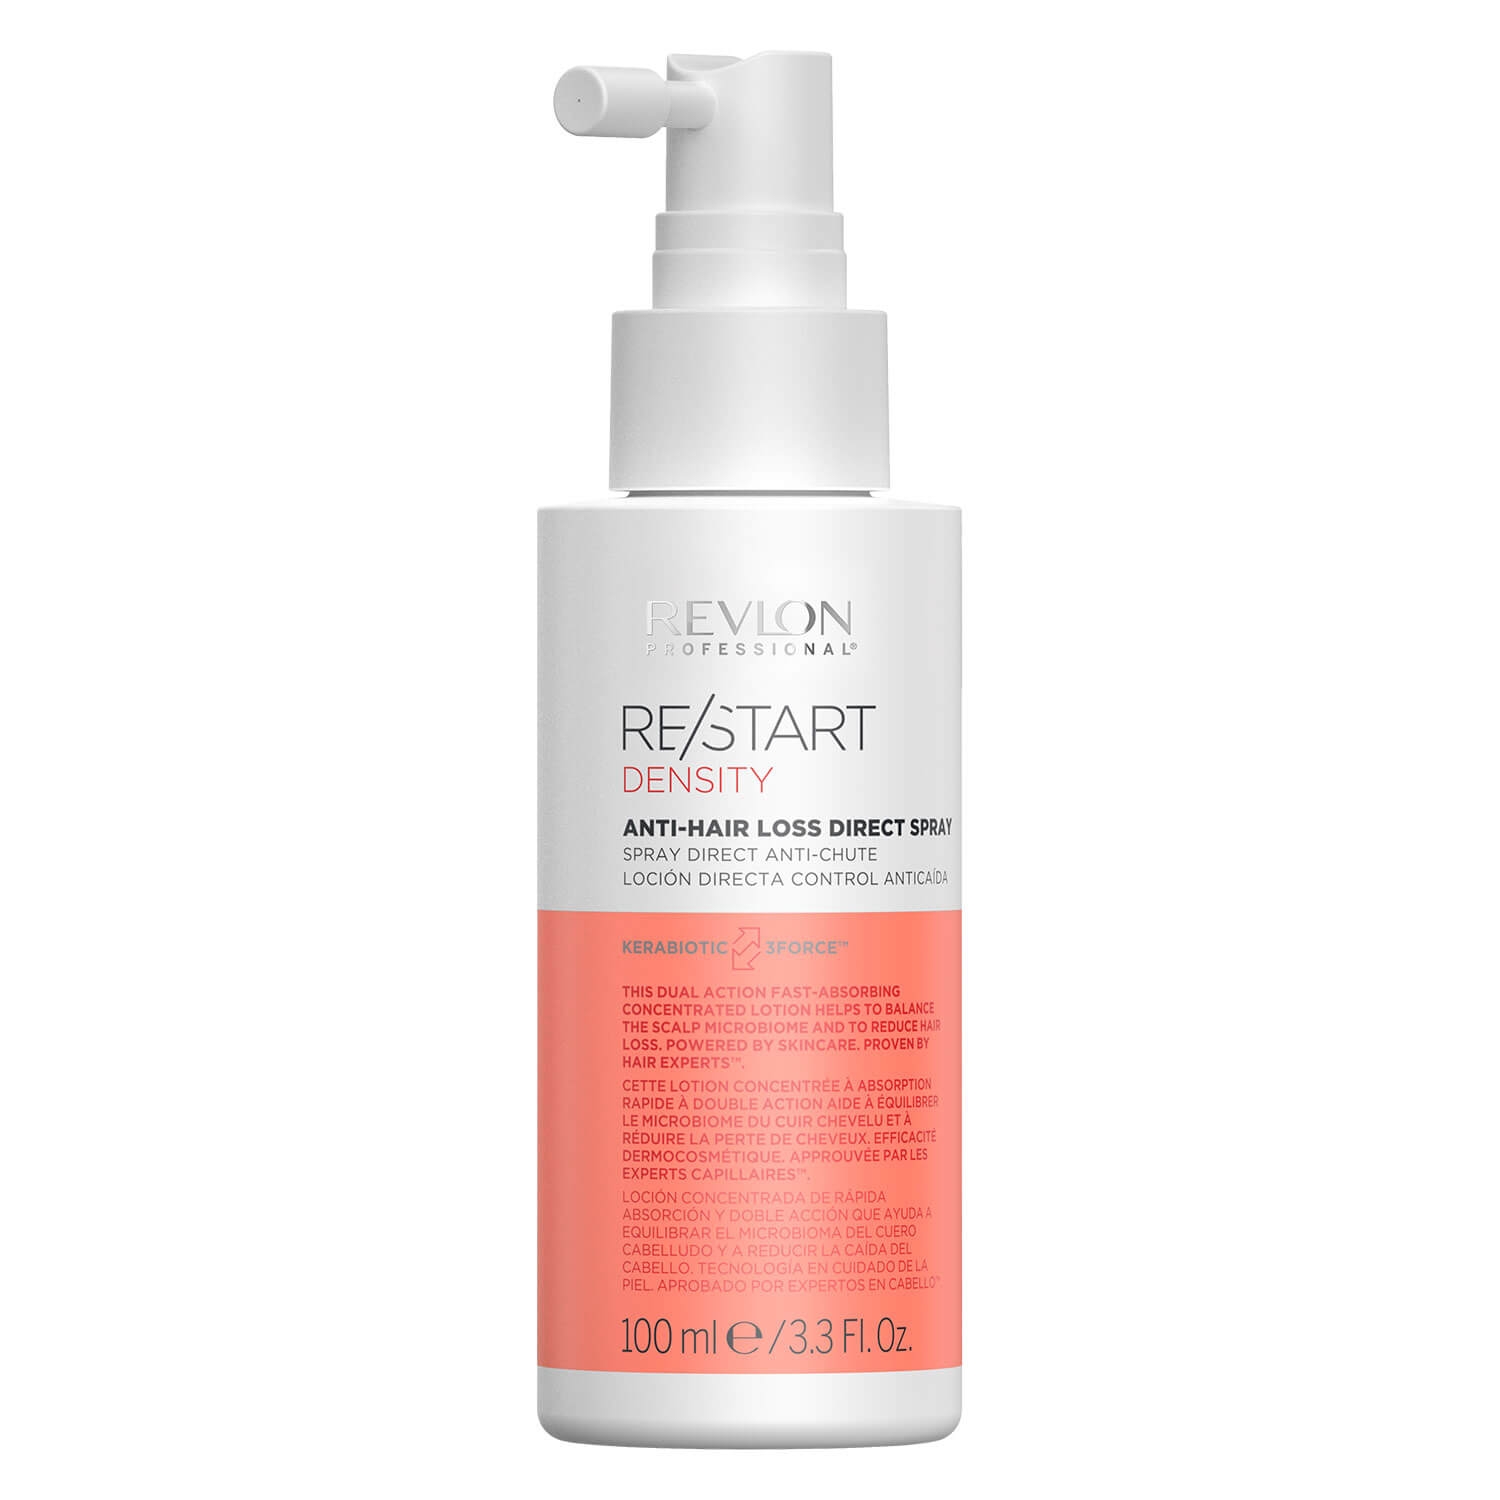 Product image from RE/START DENSITY - Anti-Hair Loss Direct Spray